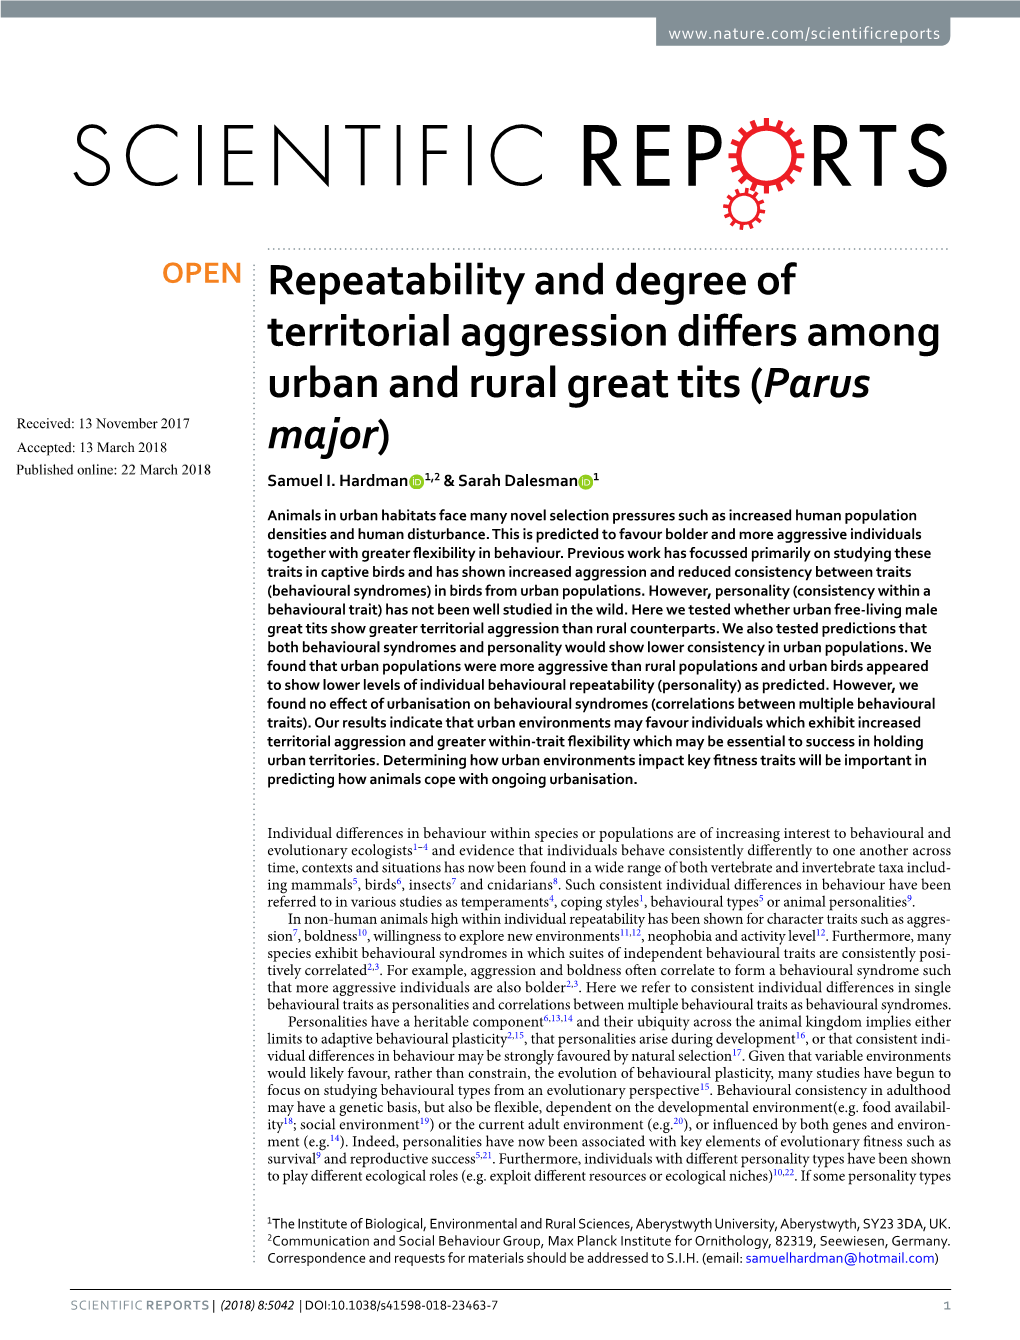 Repeatability and Degree of Territorial Aggression Differs Among Urban